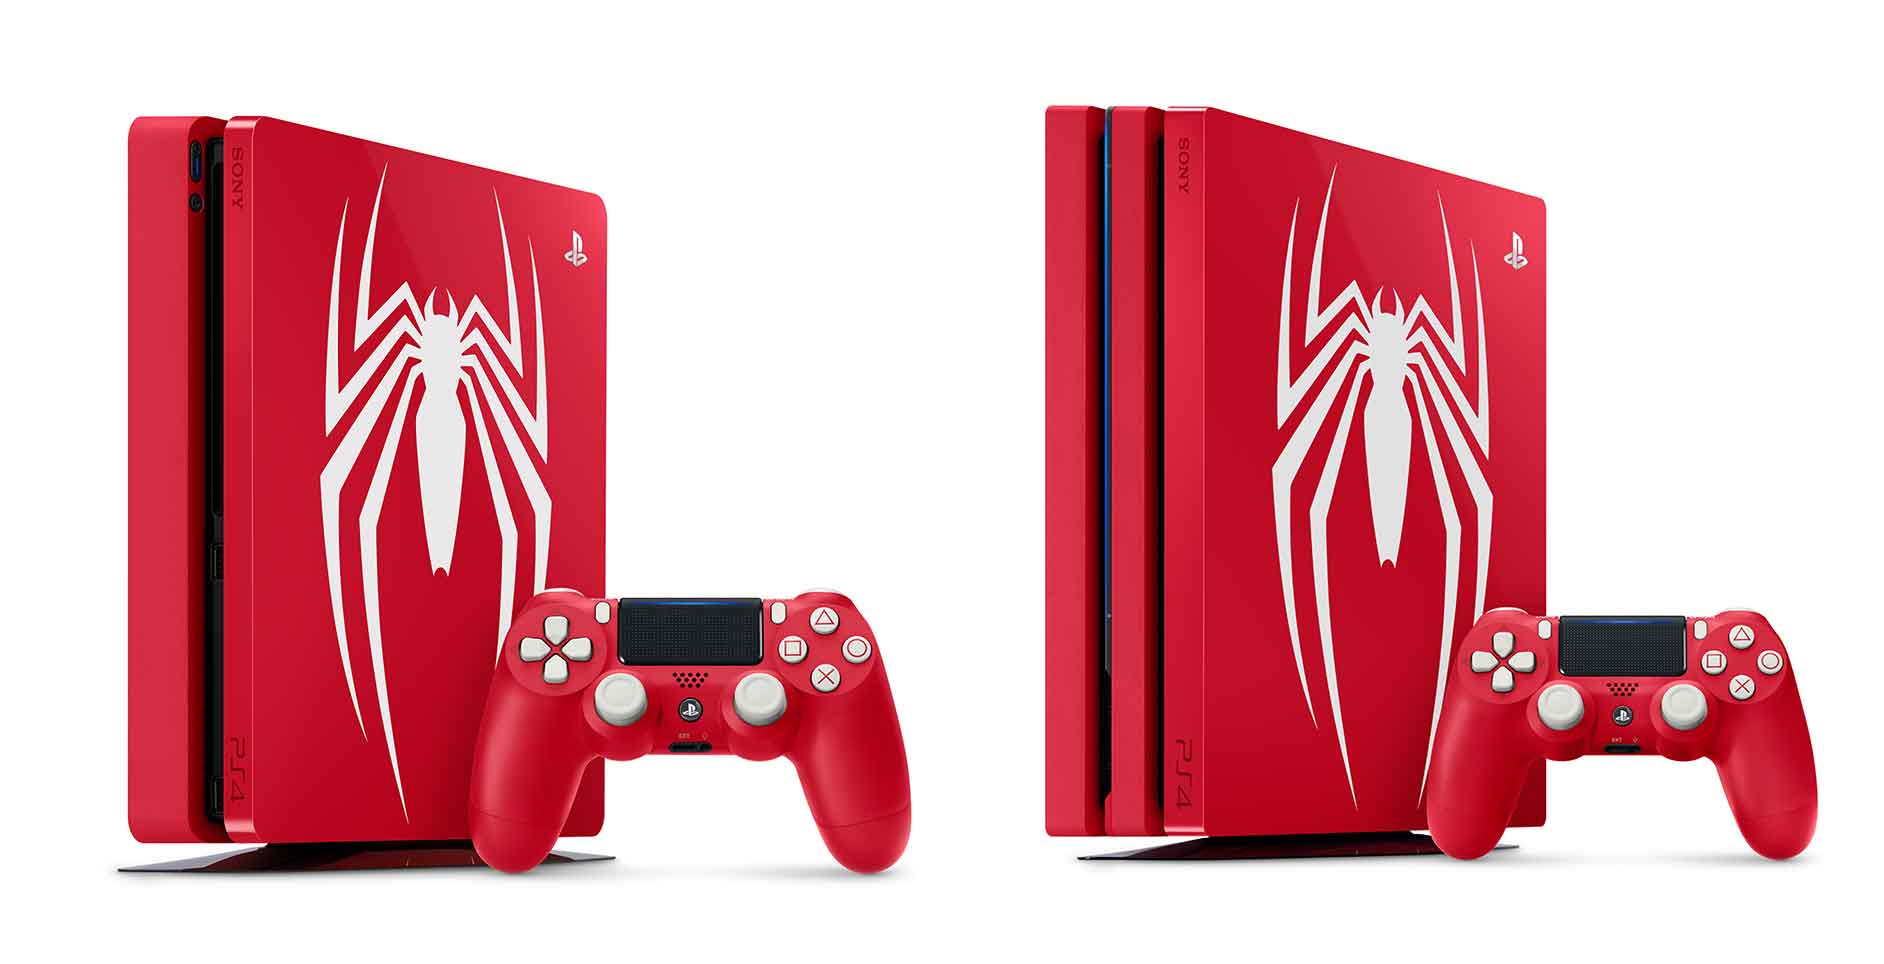 ps4 console with spiderman game